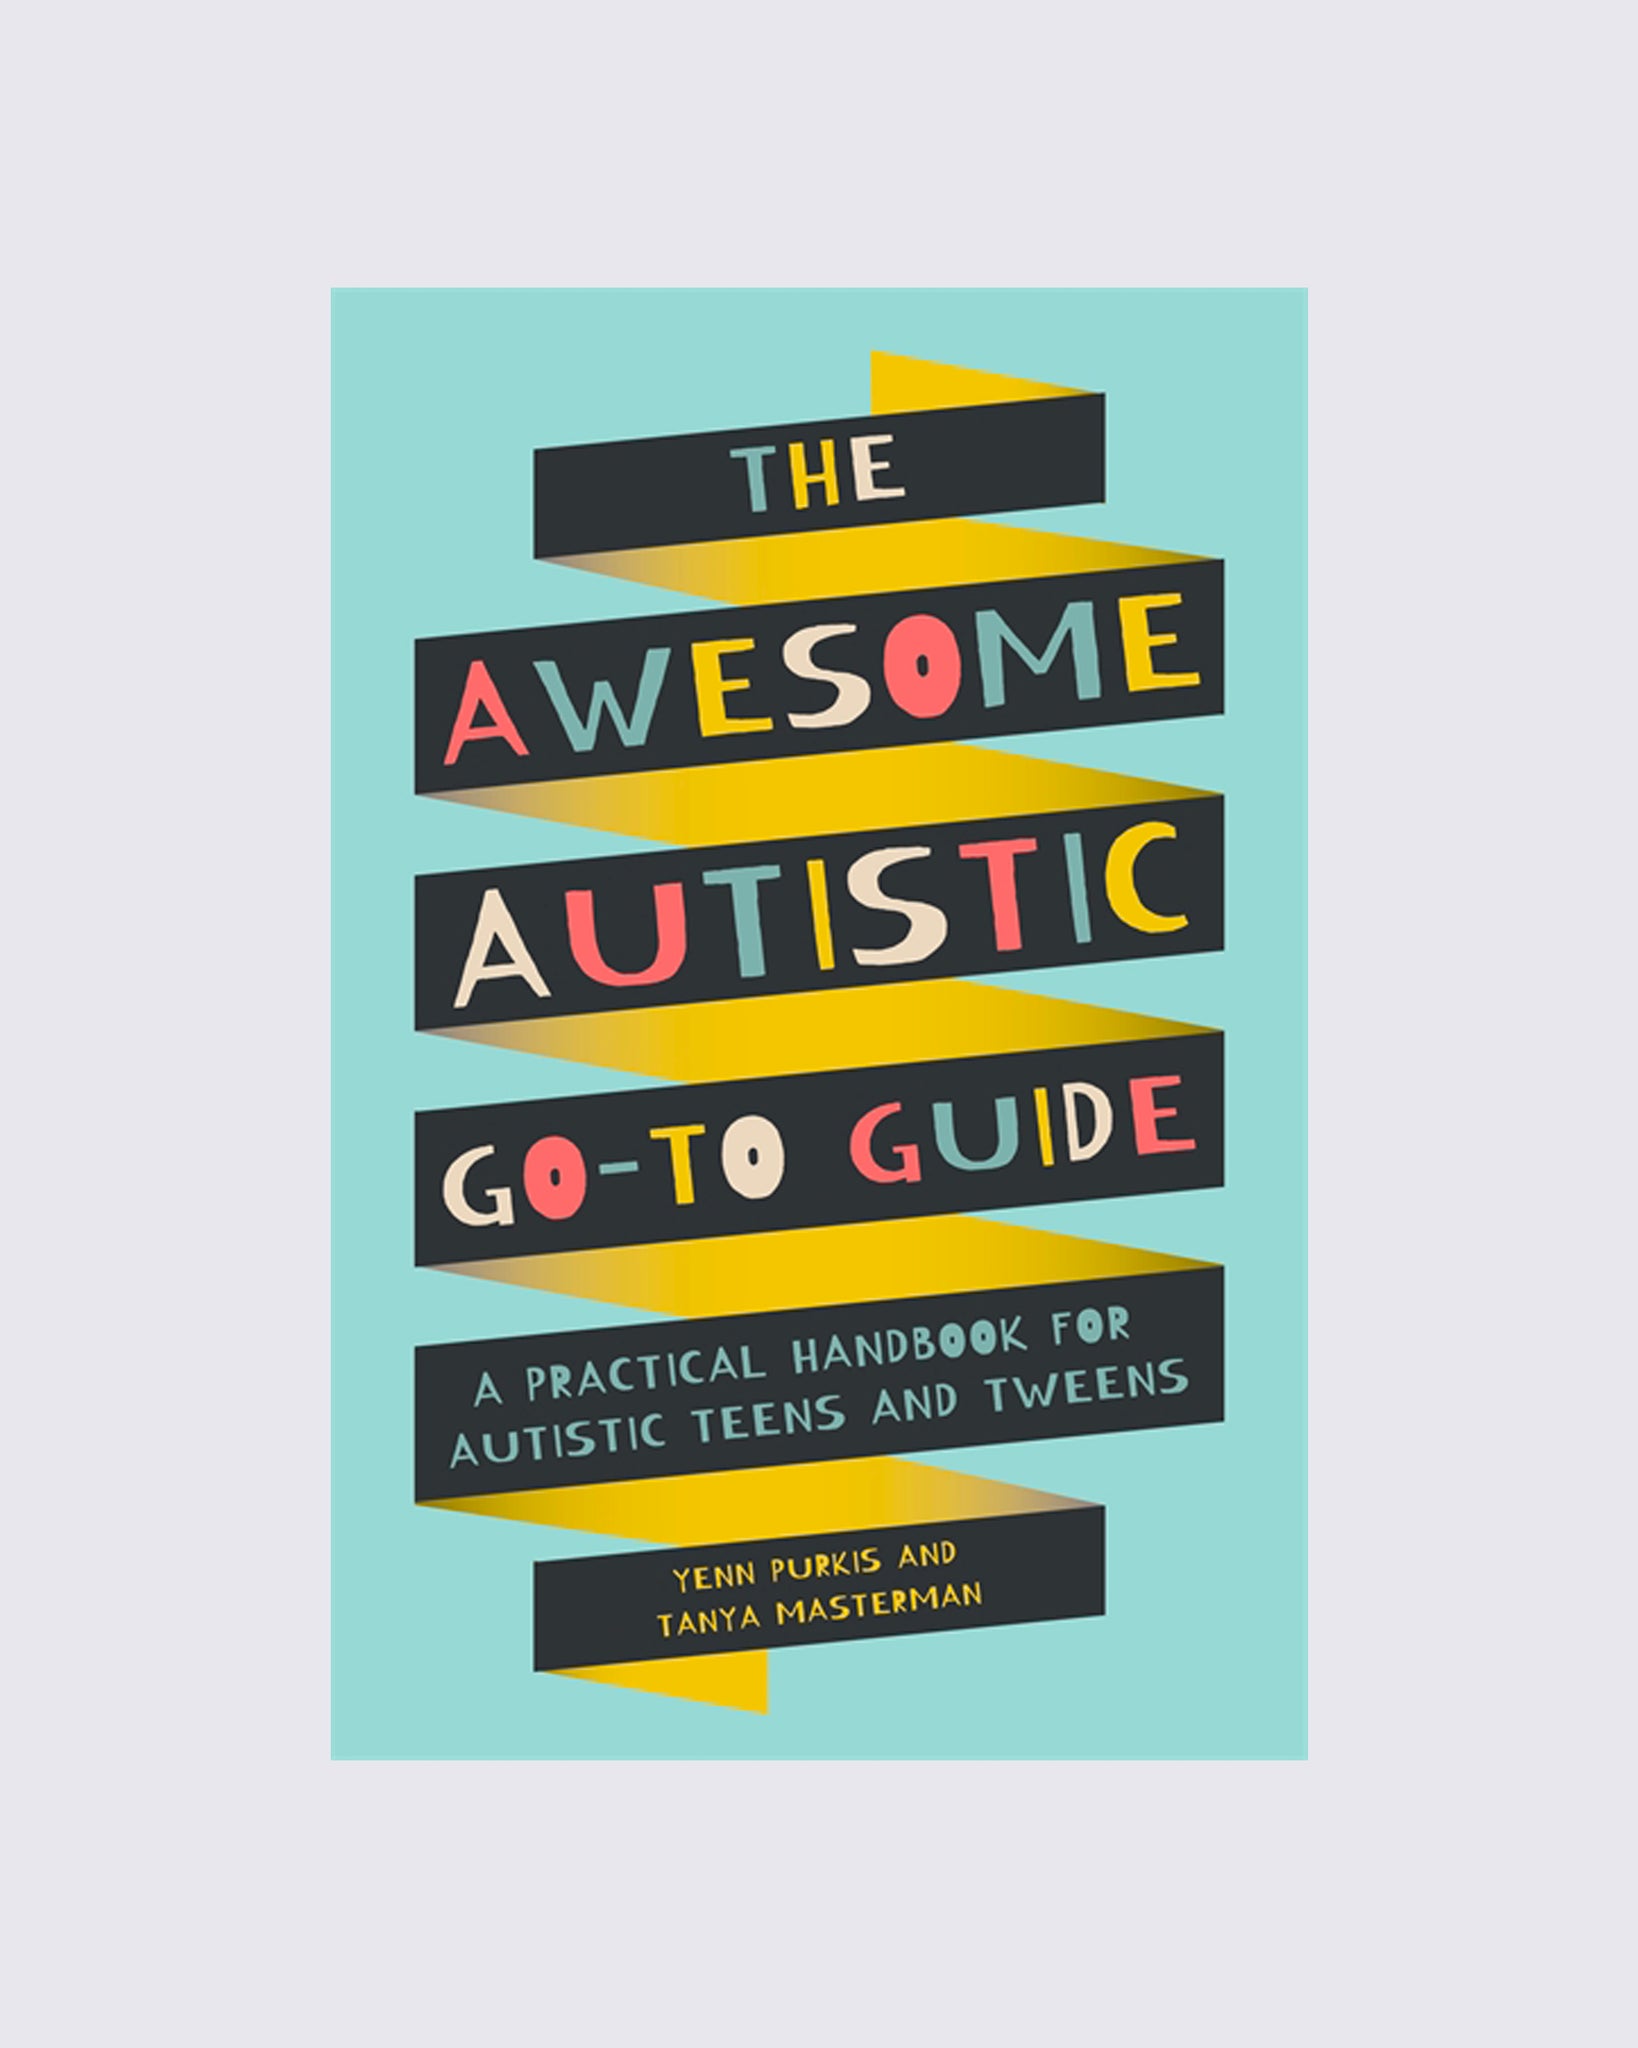 The Awesome Autistic Go-To Guide: A Practical Handbook for Autis